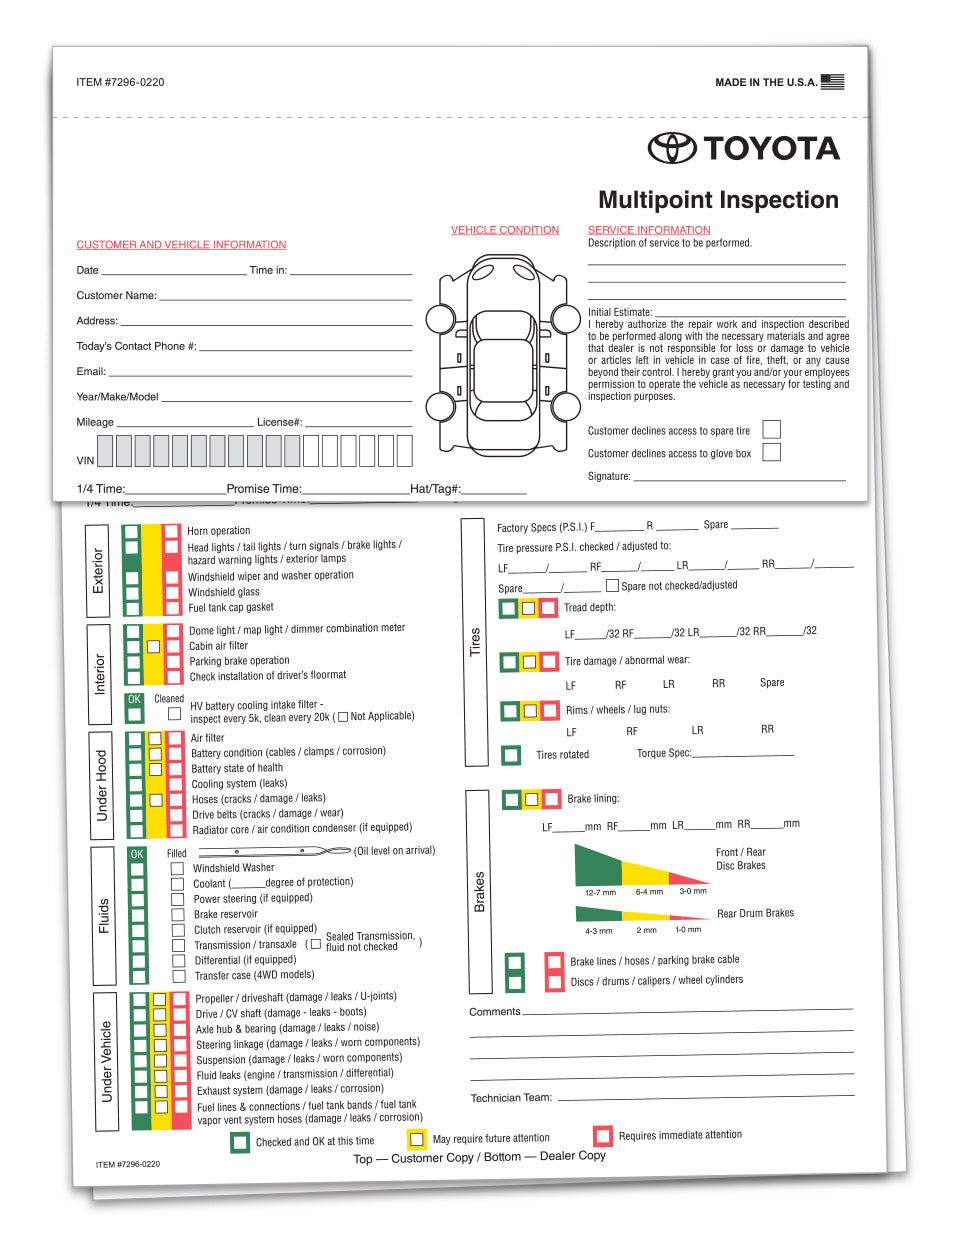 Multi-Point Inspection Forms - Manufacturer Specific - Toyota